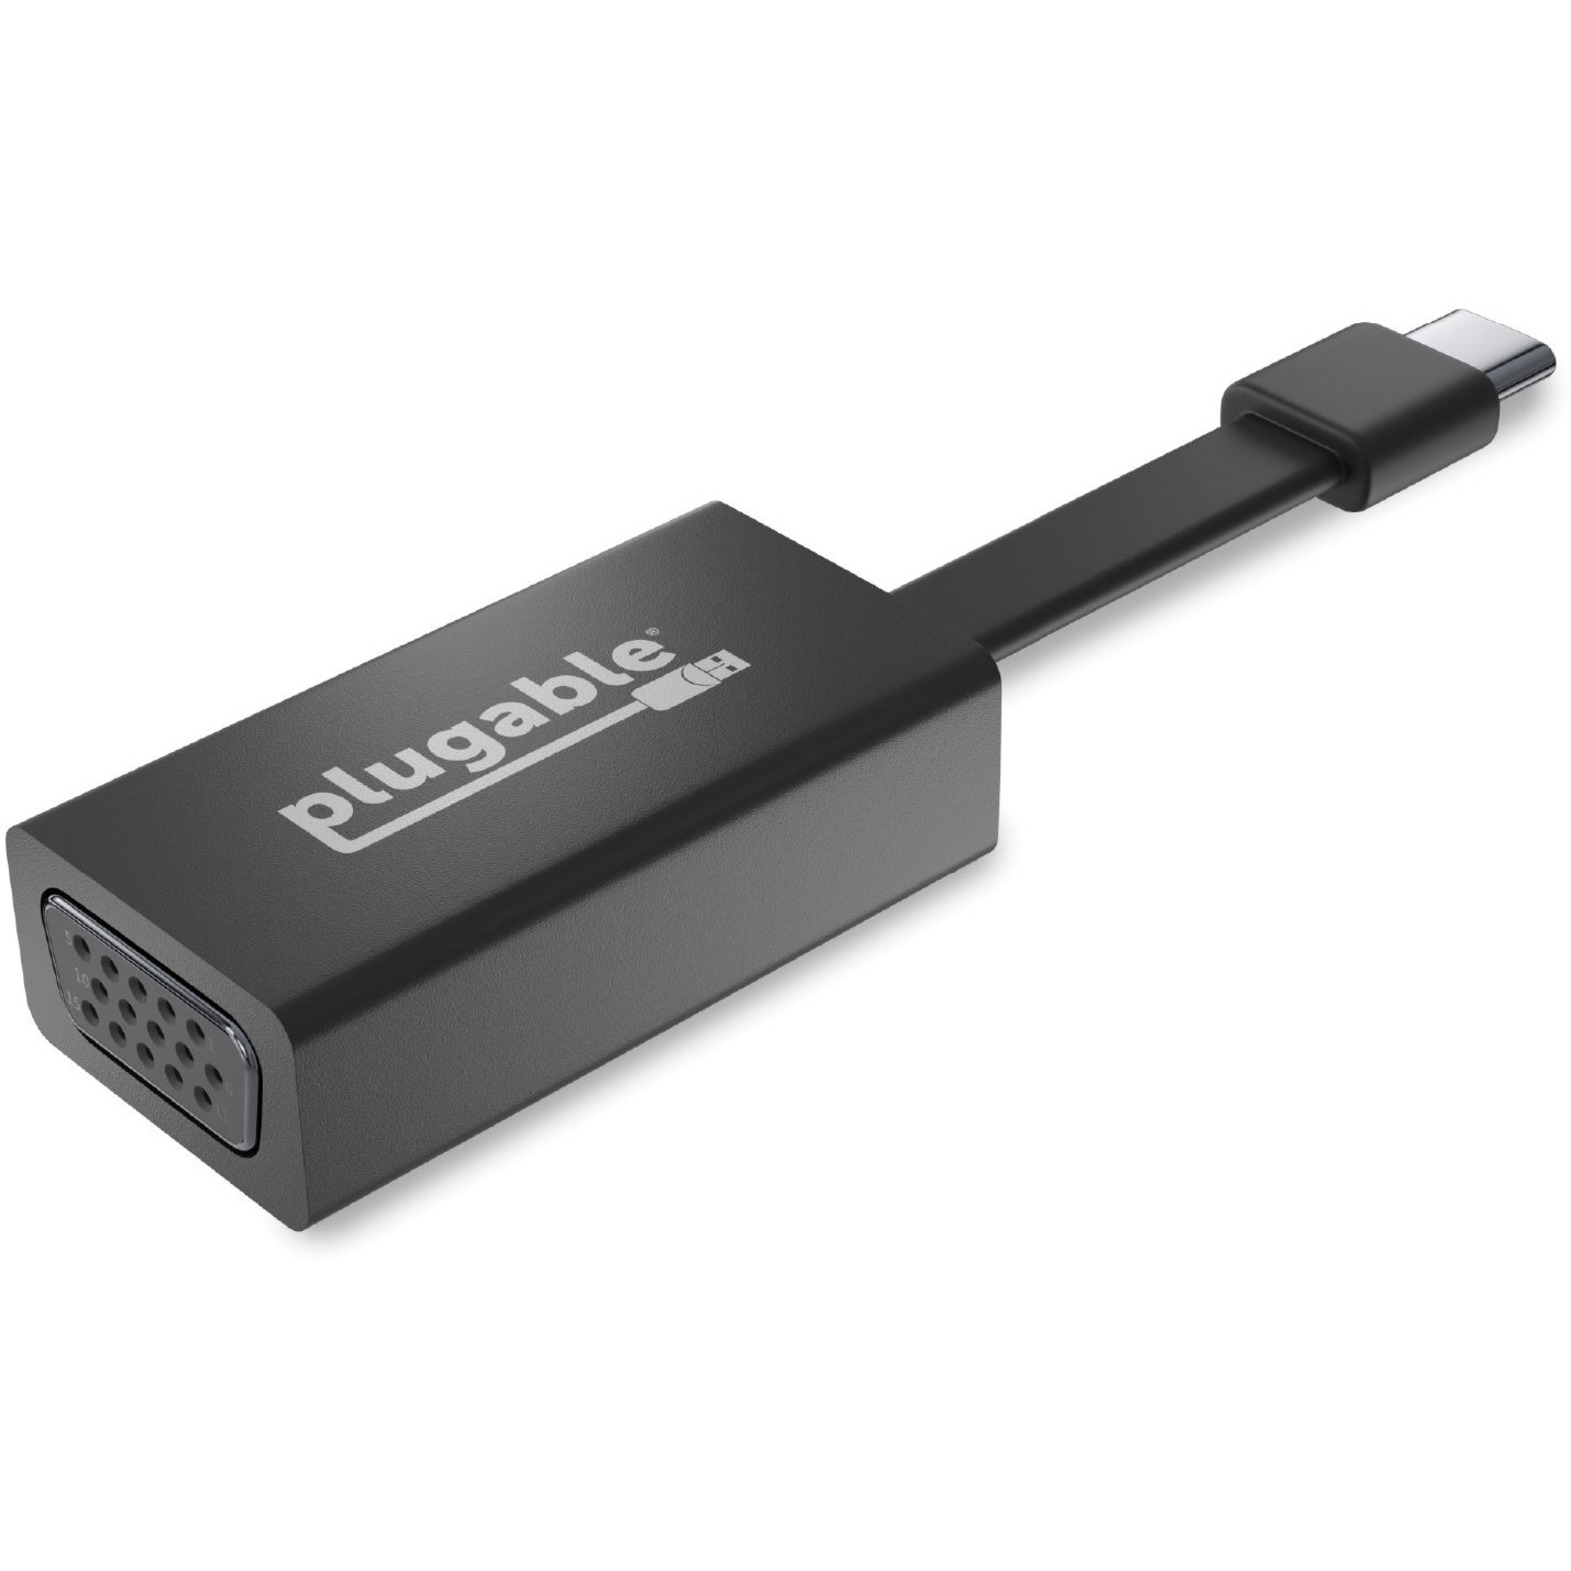 Plugable USB C to VGA Adapter, Thunderbolt 3 to VGA Adapter Compatible with Macbook Pro, Windows, Chromebooks, 2018 iPad Pro, Dell XPS, and more (Supports resolutions up to 1920x1200 @ 60Hz) - image 1 of 6